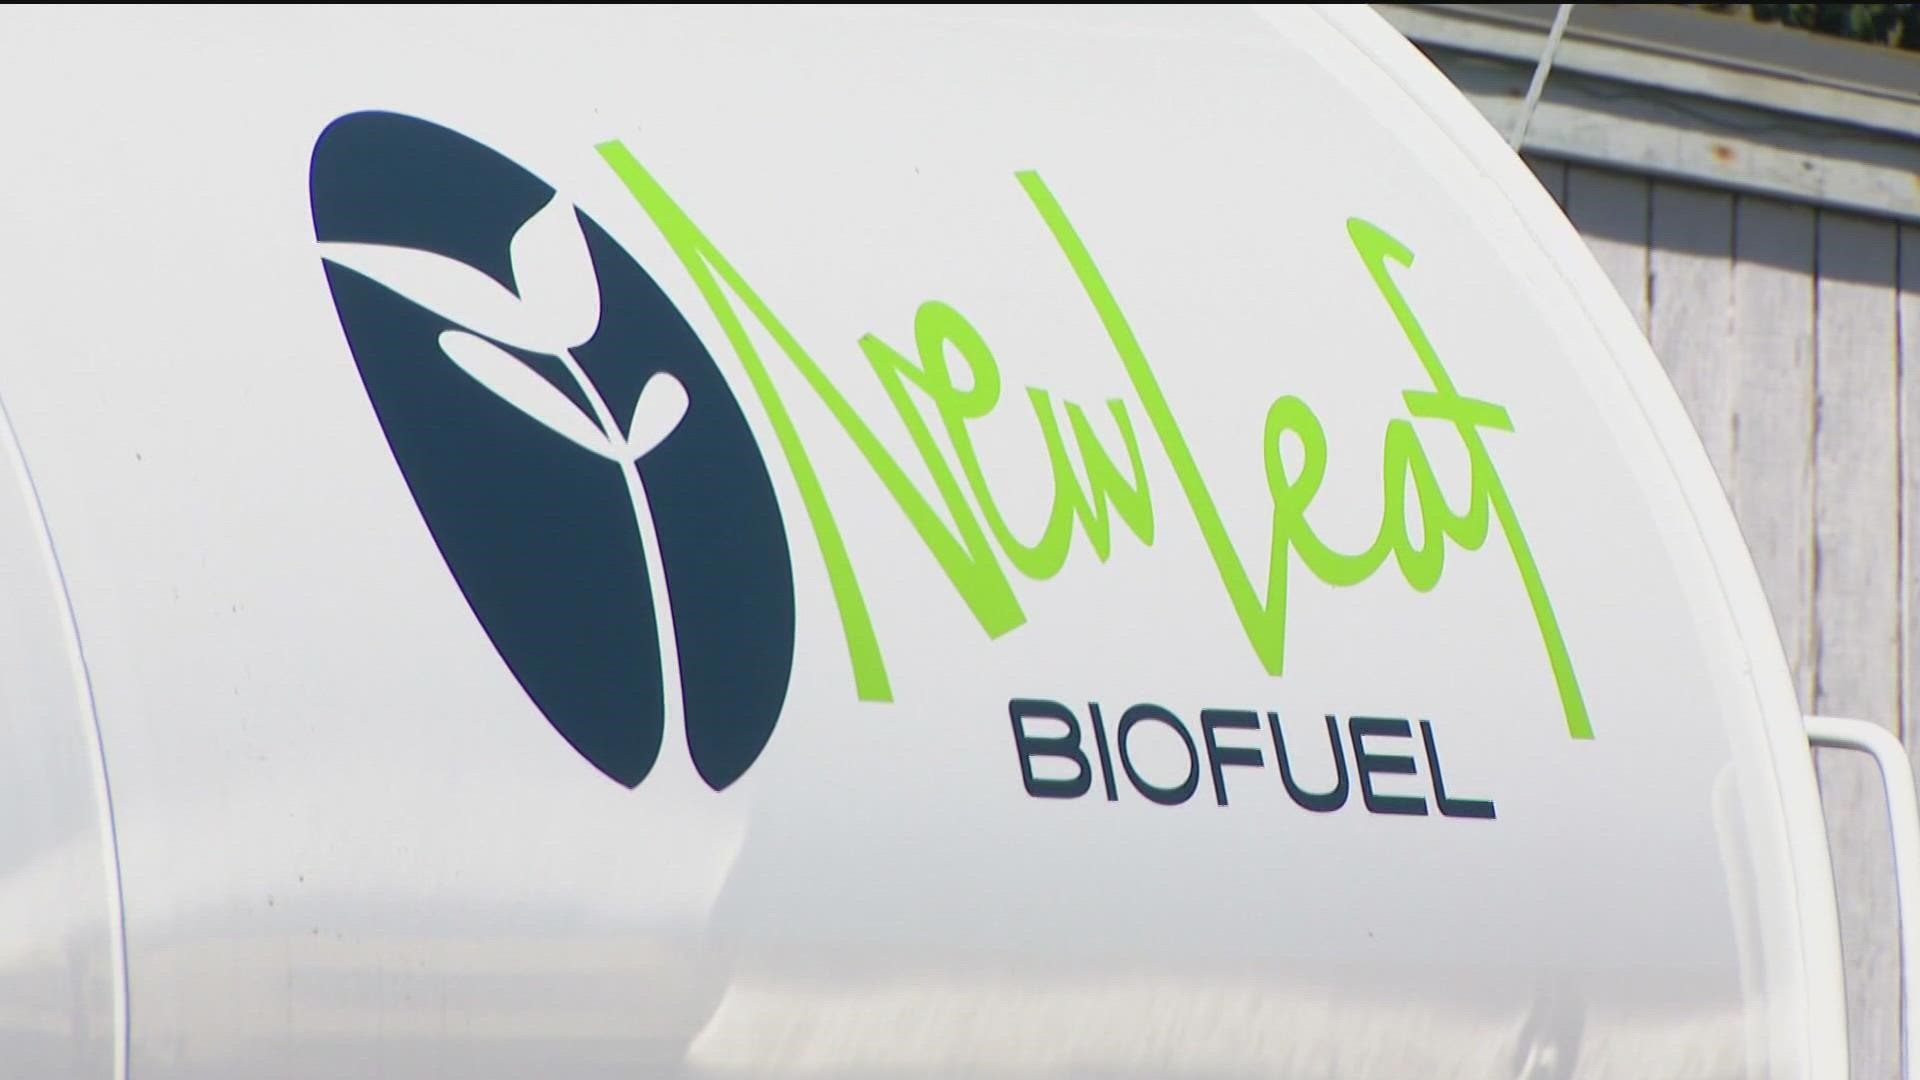 The biofuel plant company says they have completed an odor-reducing system installation, but residents are still worried the stench could return.